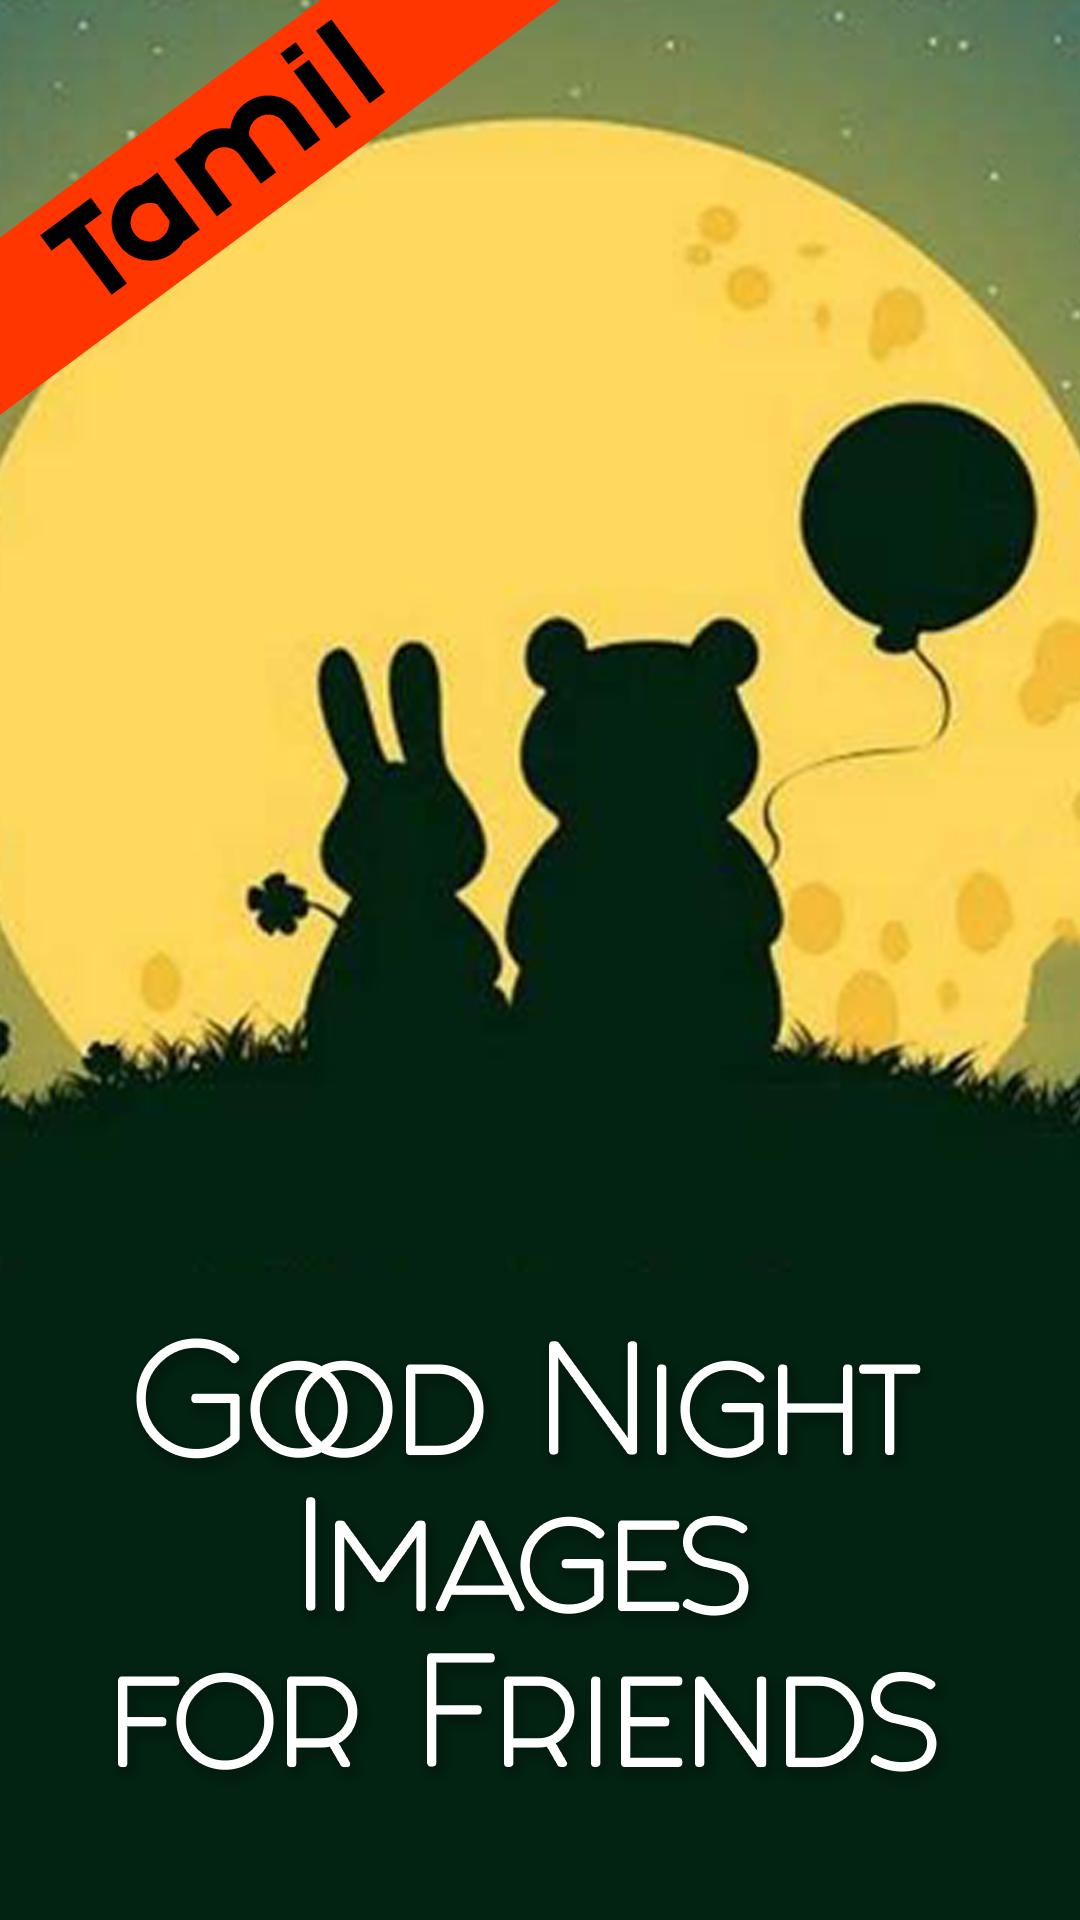 Good Night Images Quotes For Friends In Tamil For Android Apk